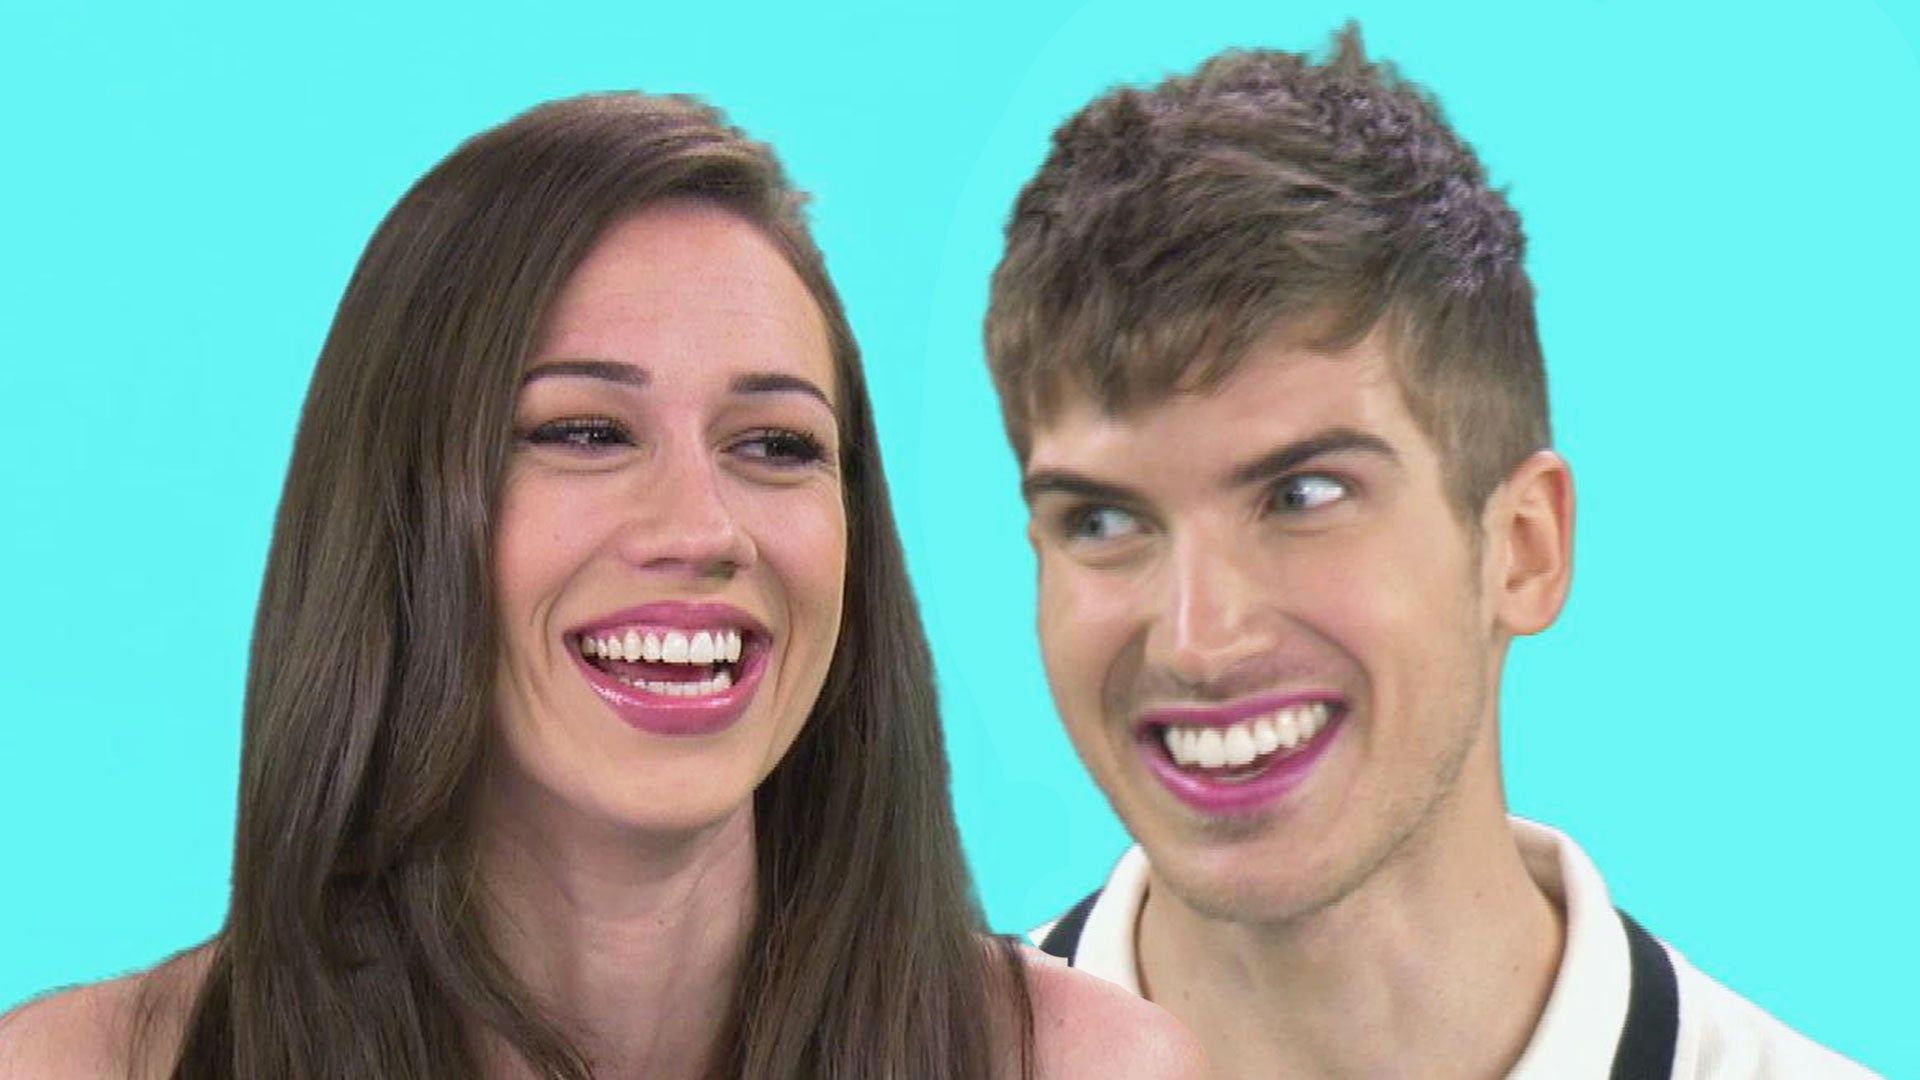 Why Joey Graceffa and Colleen Ballinger Agree Killing in 'Escape.